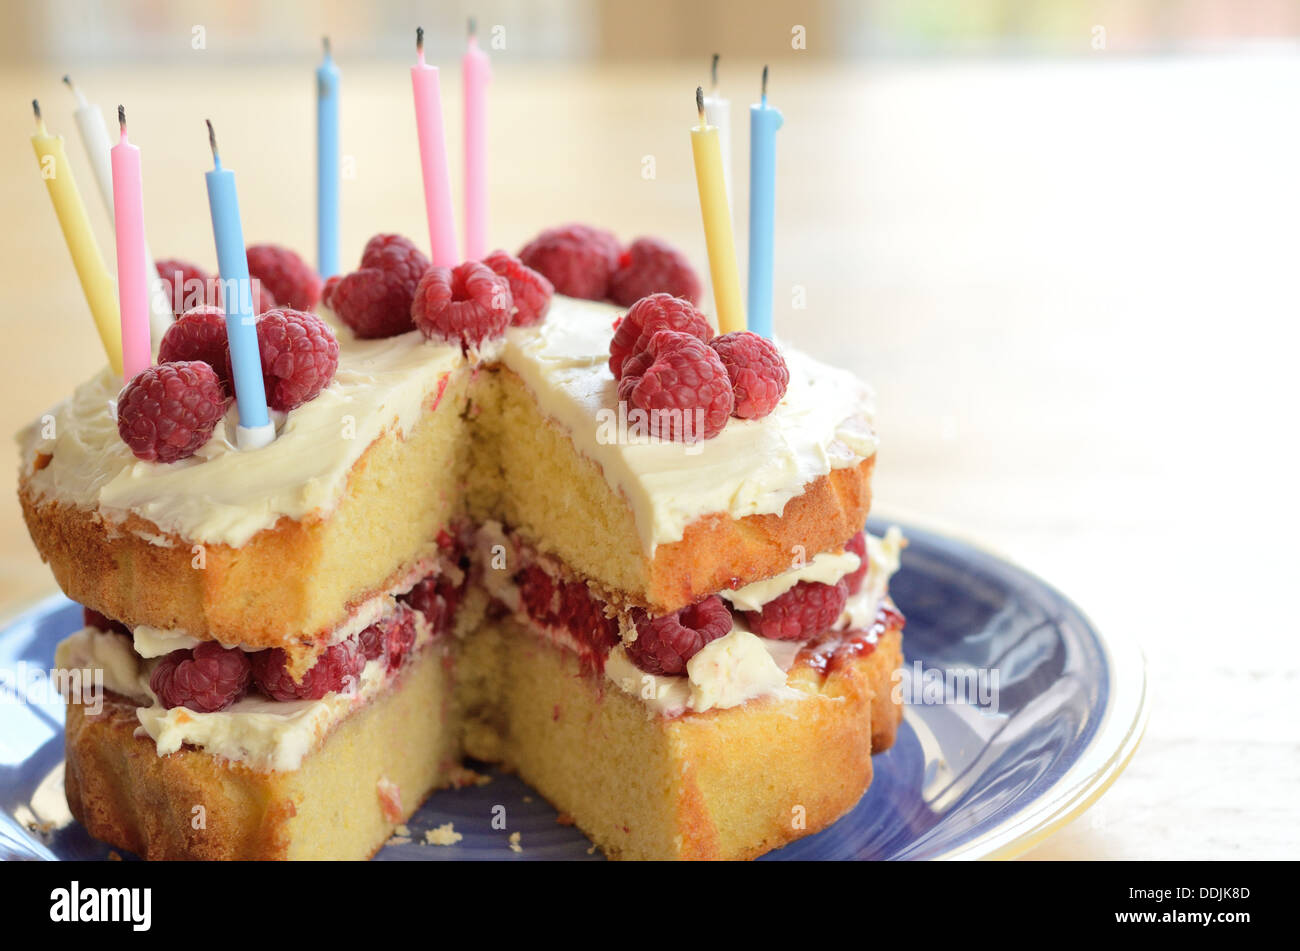 Birthday Cake homemade with sponge, raspberries, cream and candles on a blue plate and wooden table Stock Photo